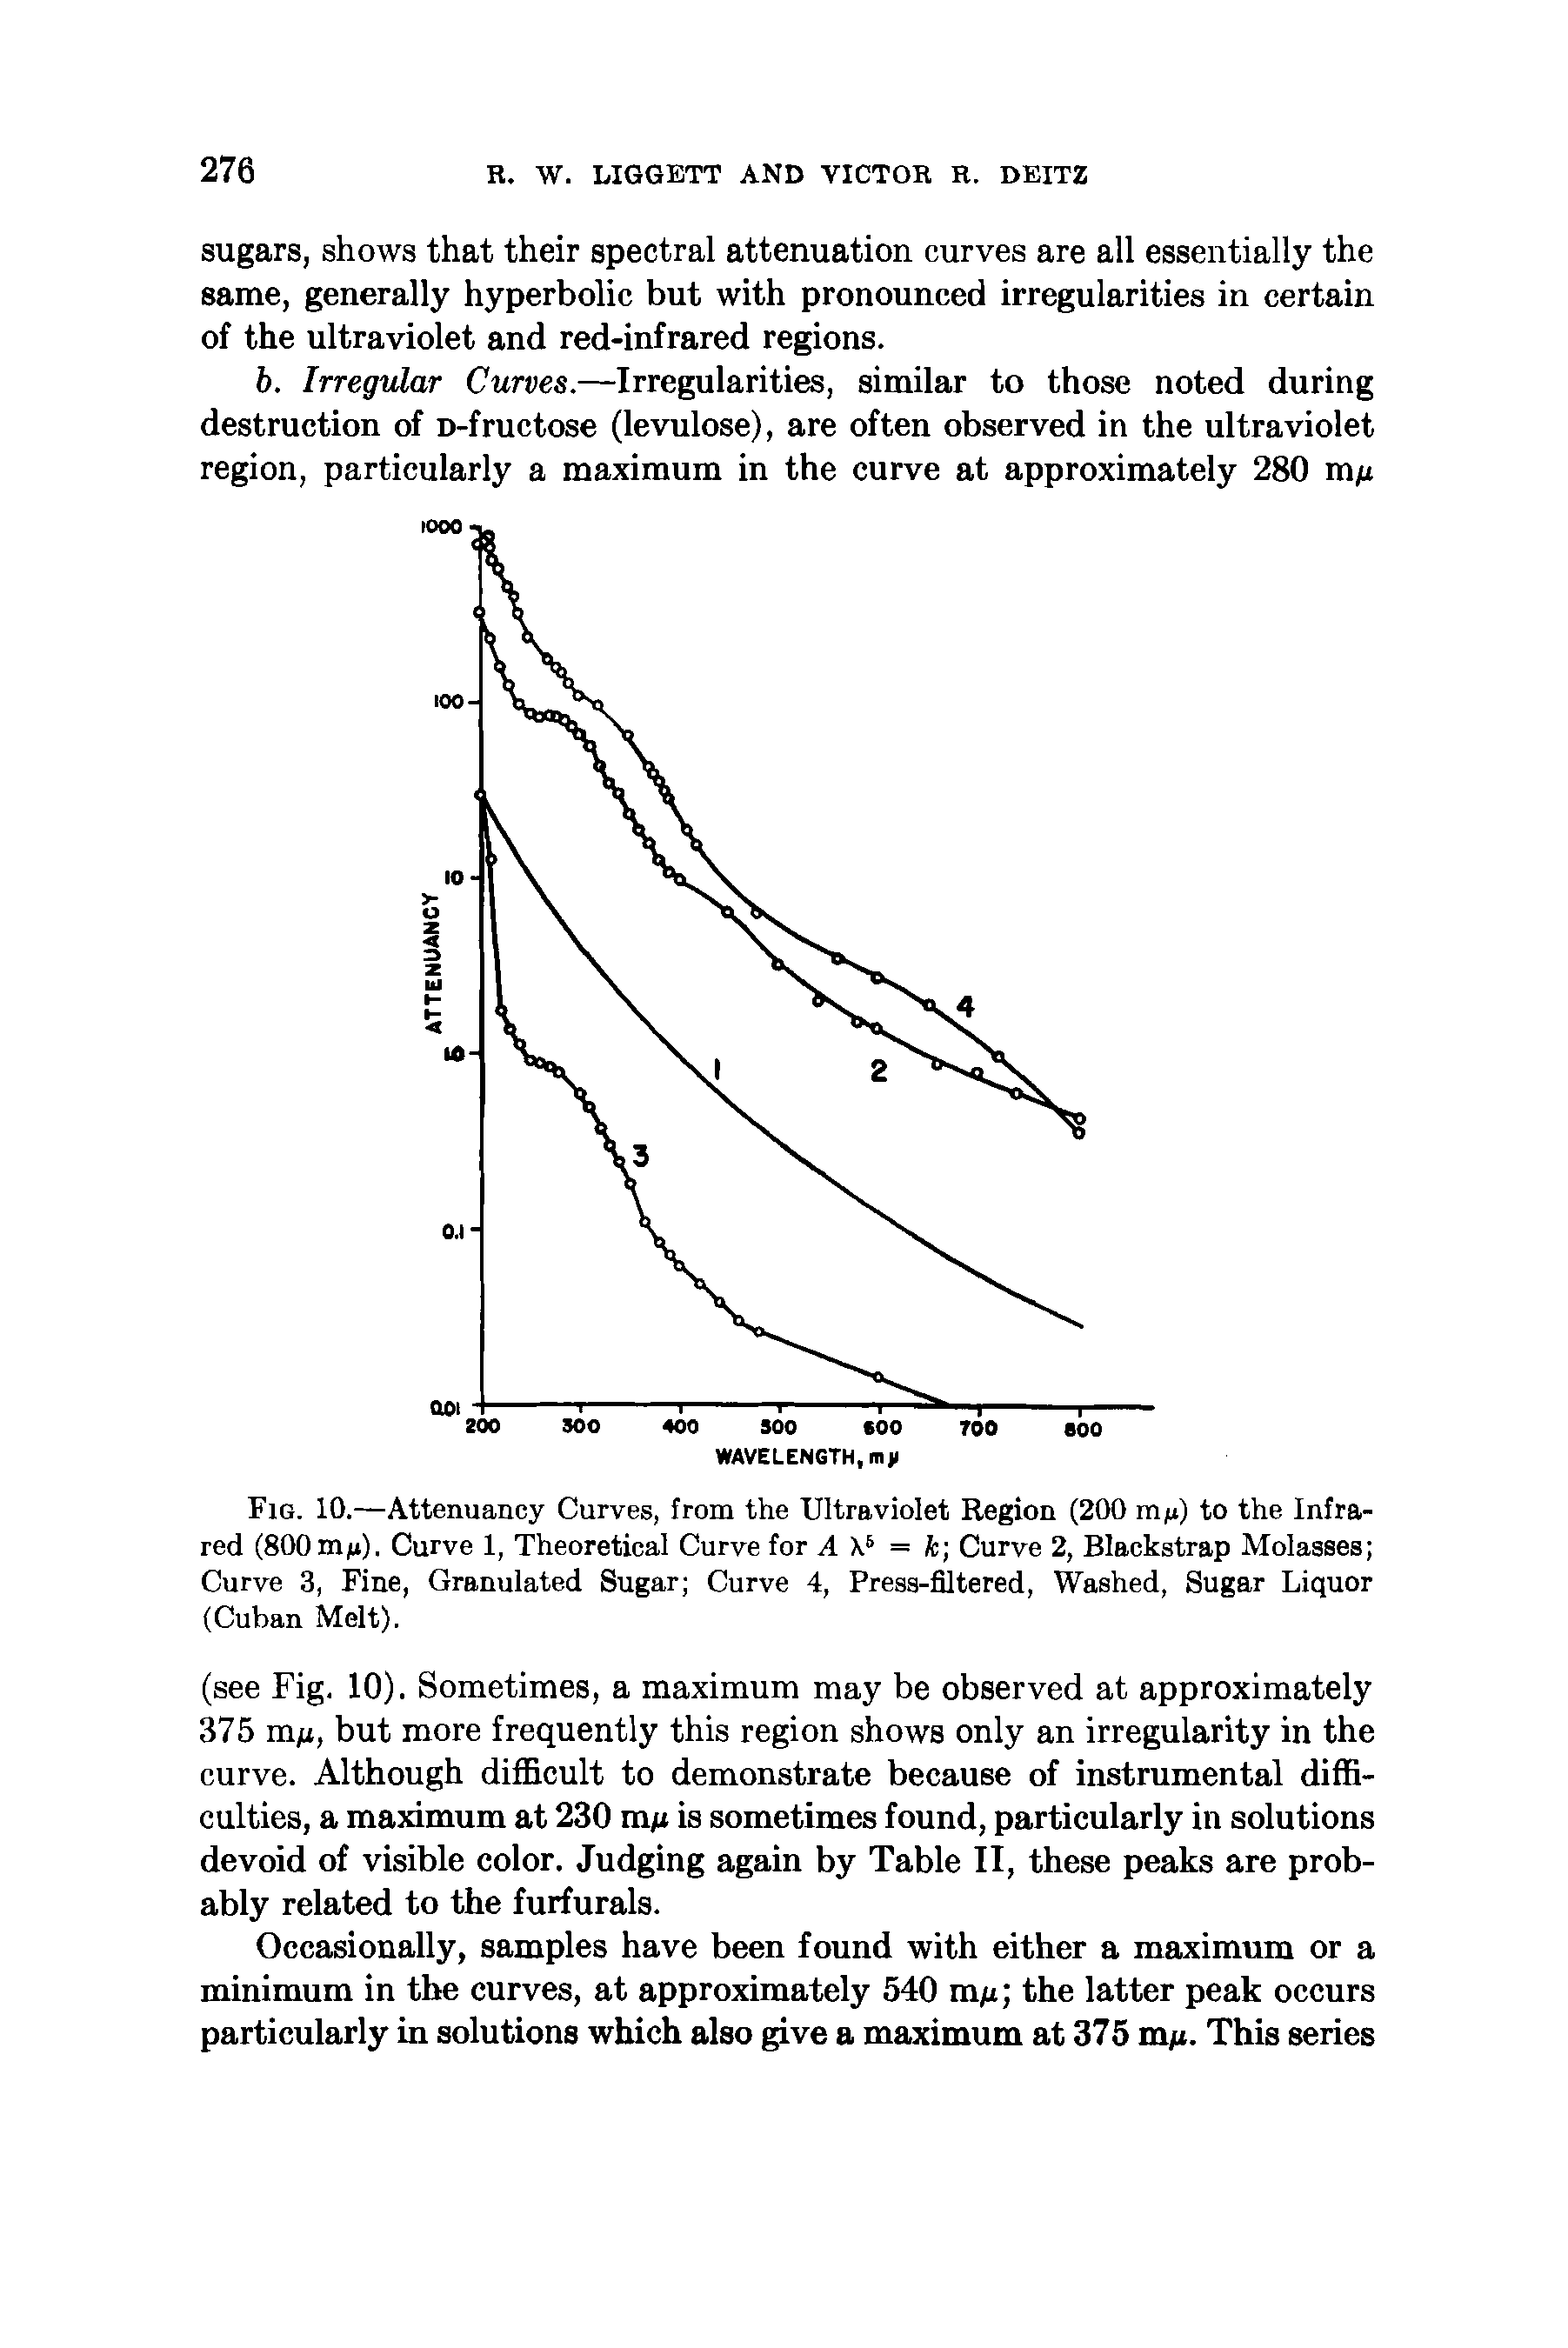 Fig. 10.—Attenuancy Curves, from the Ultraviolet Region (200 m i) to the Infrared (800 mu). Curve 1, Theoretical Curve for A X6 = k Curve 2, Blackstrap Molasses Curve 3, Fine, Granulated Sugar Curve 4, Press-filtered, Washed, Sugar Liquor (Cuban Melt).